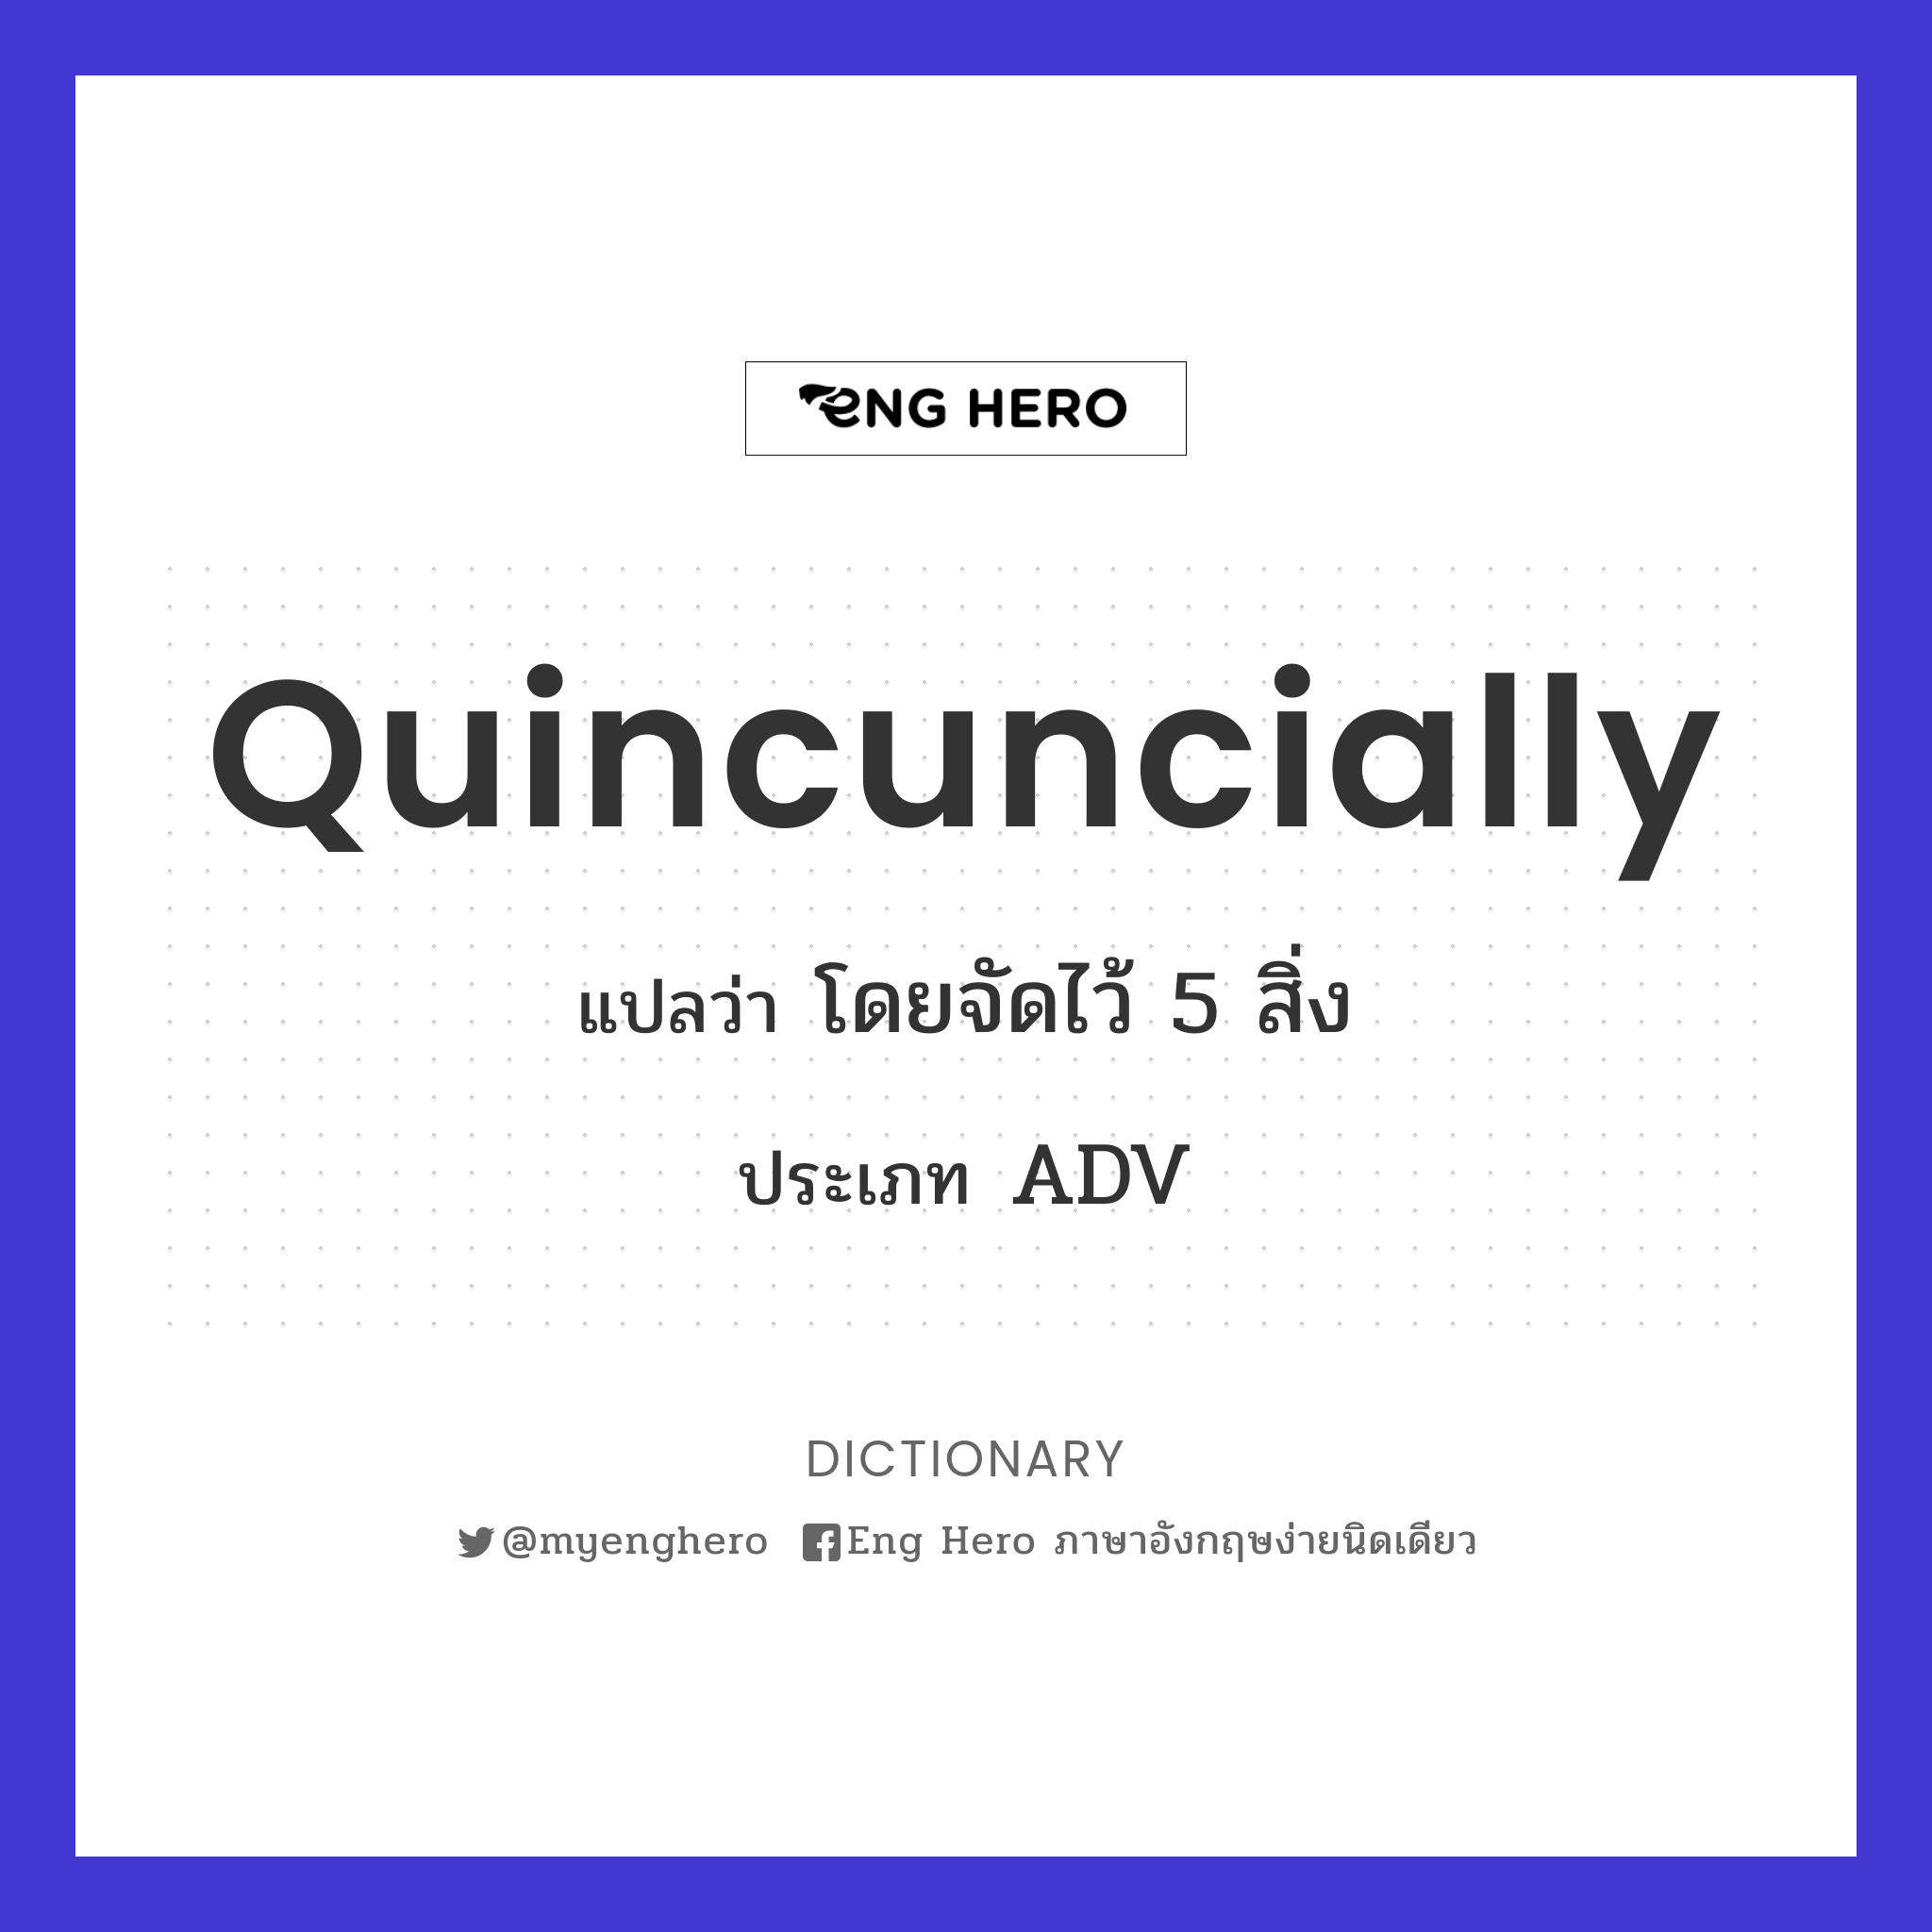 quincuncially